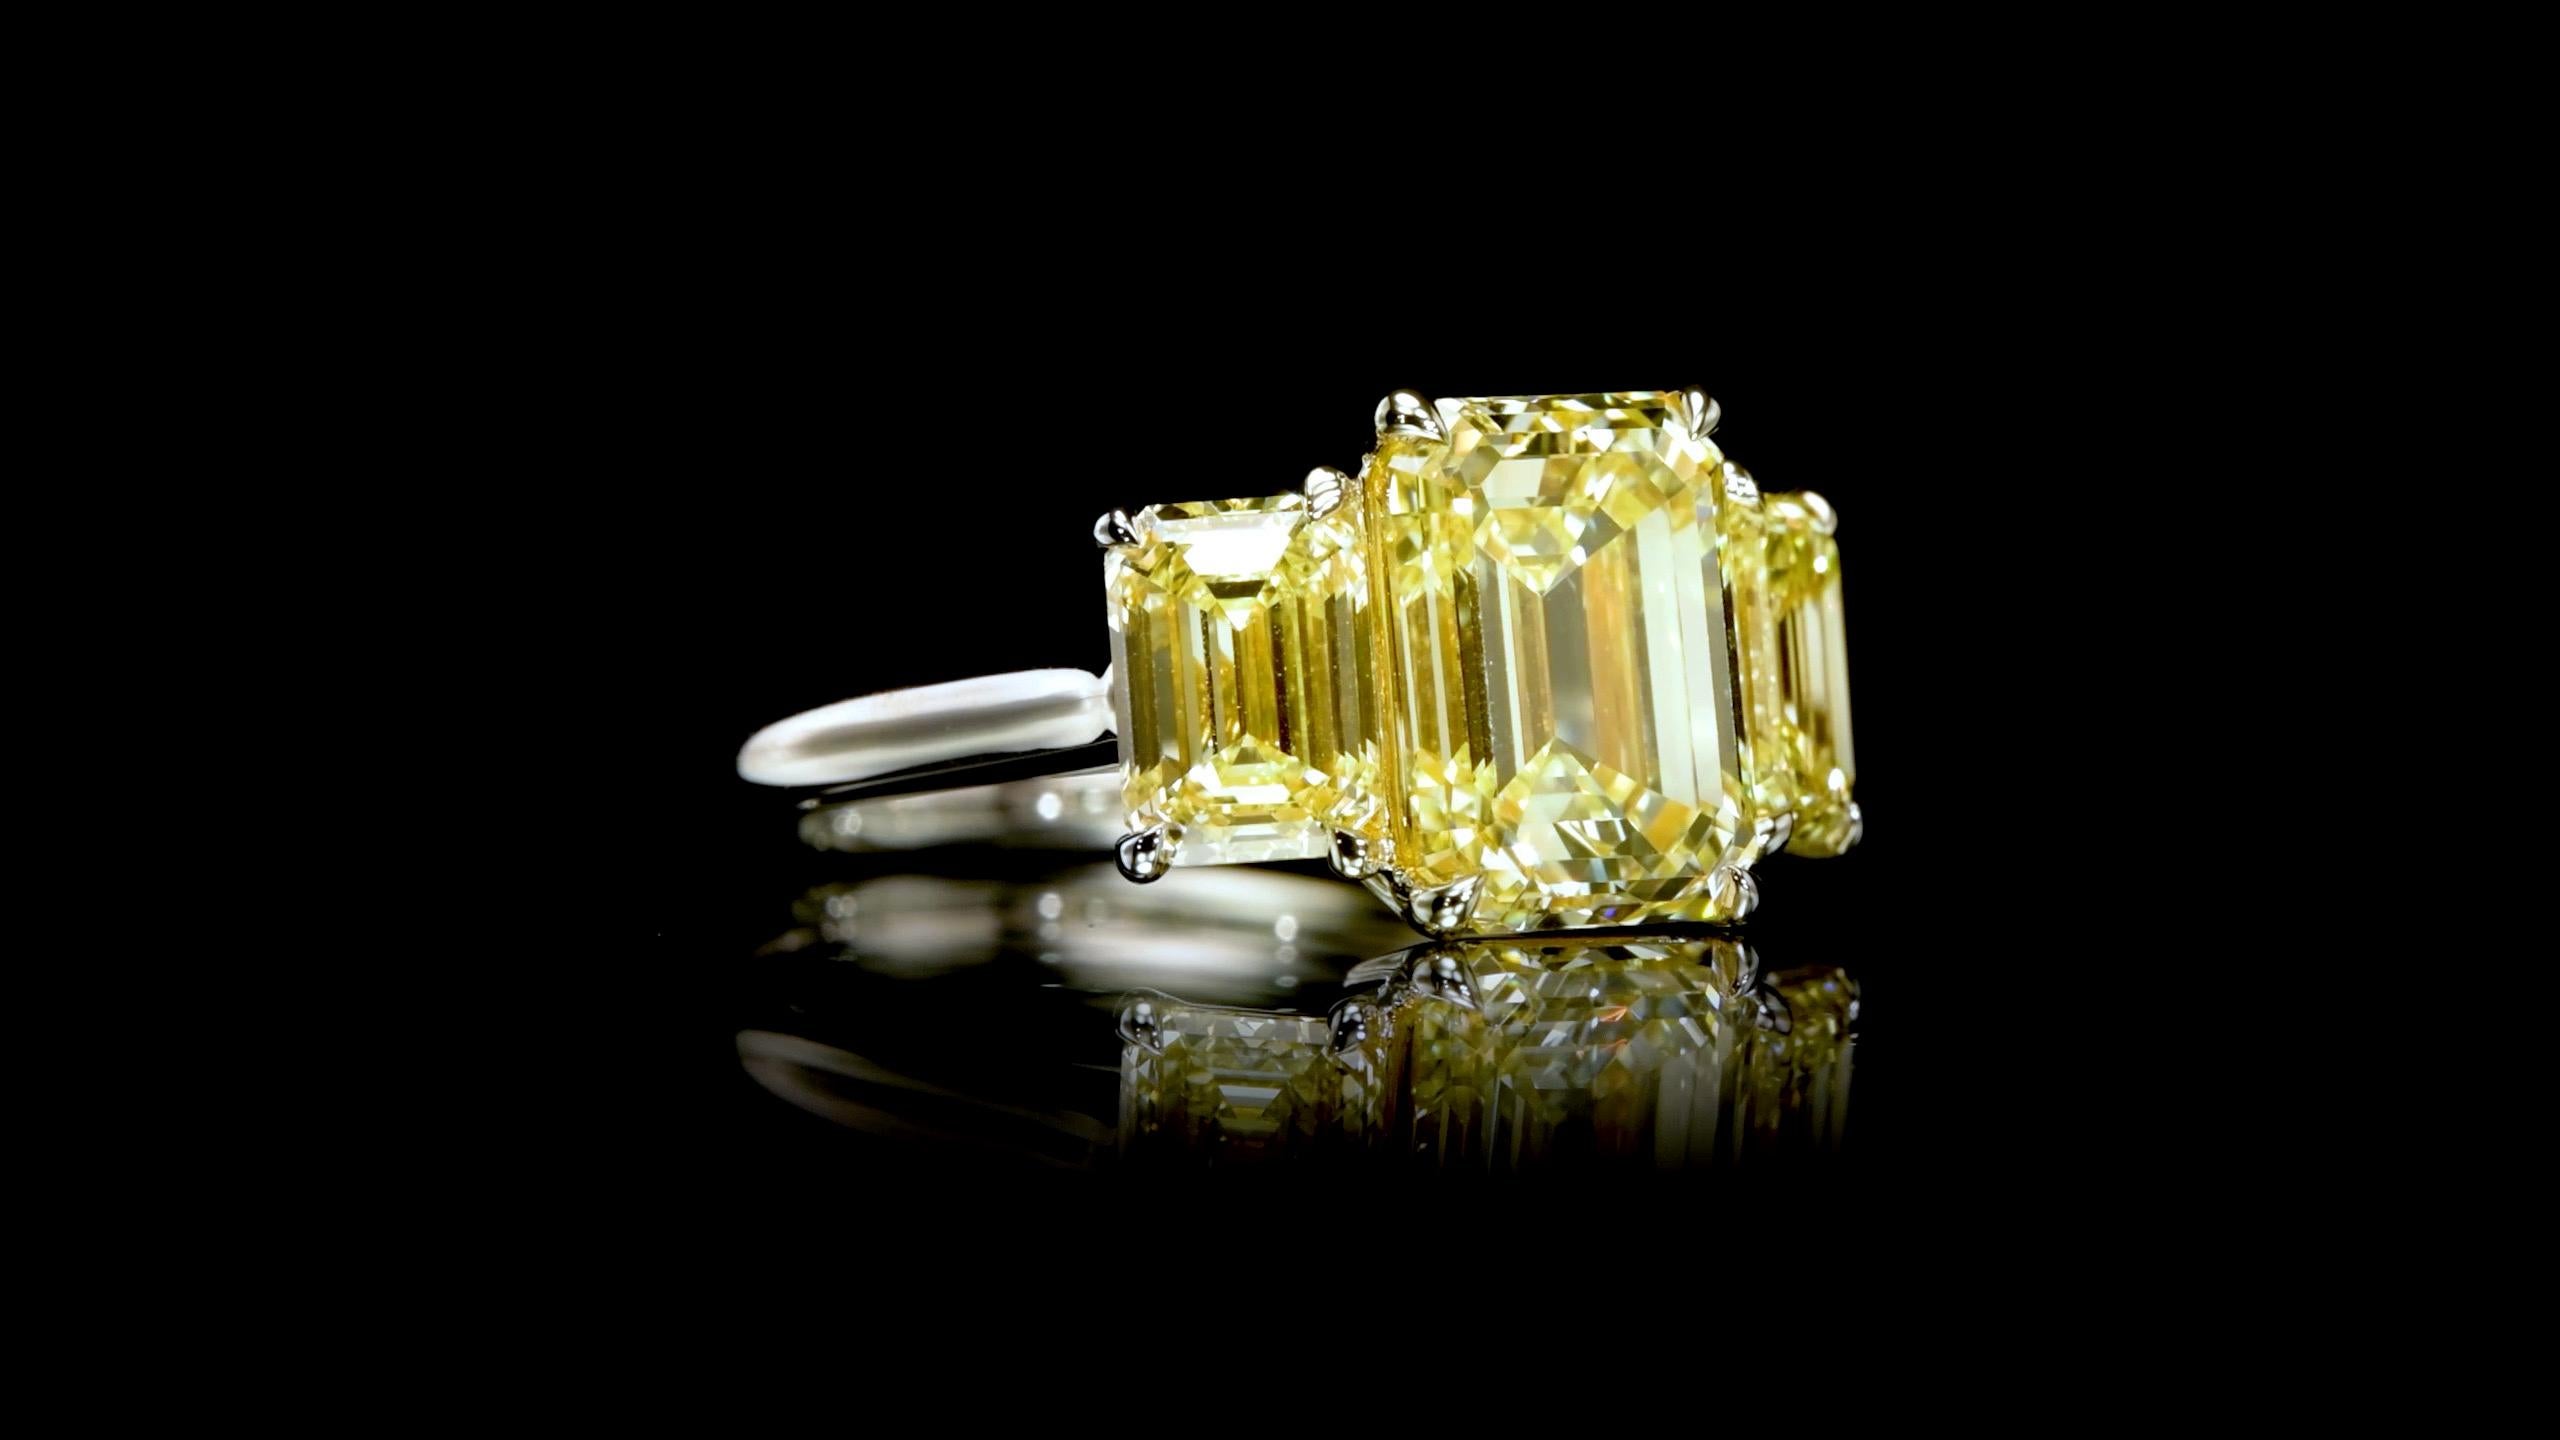 From Emilio Jewelry New York, a well known and trusted dealer located on New York's iconic Fifth Avenue. 

We are are experts in natural fancy color diamonds, and can bring out their best potential in our hand made custom mountings. These mountings